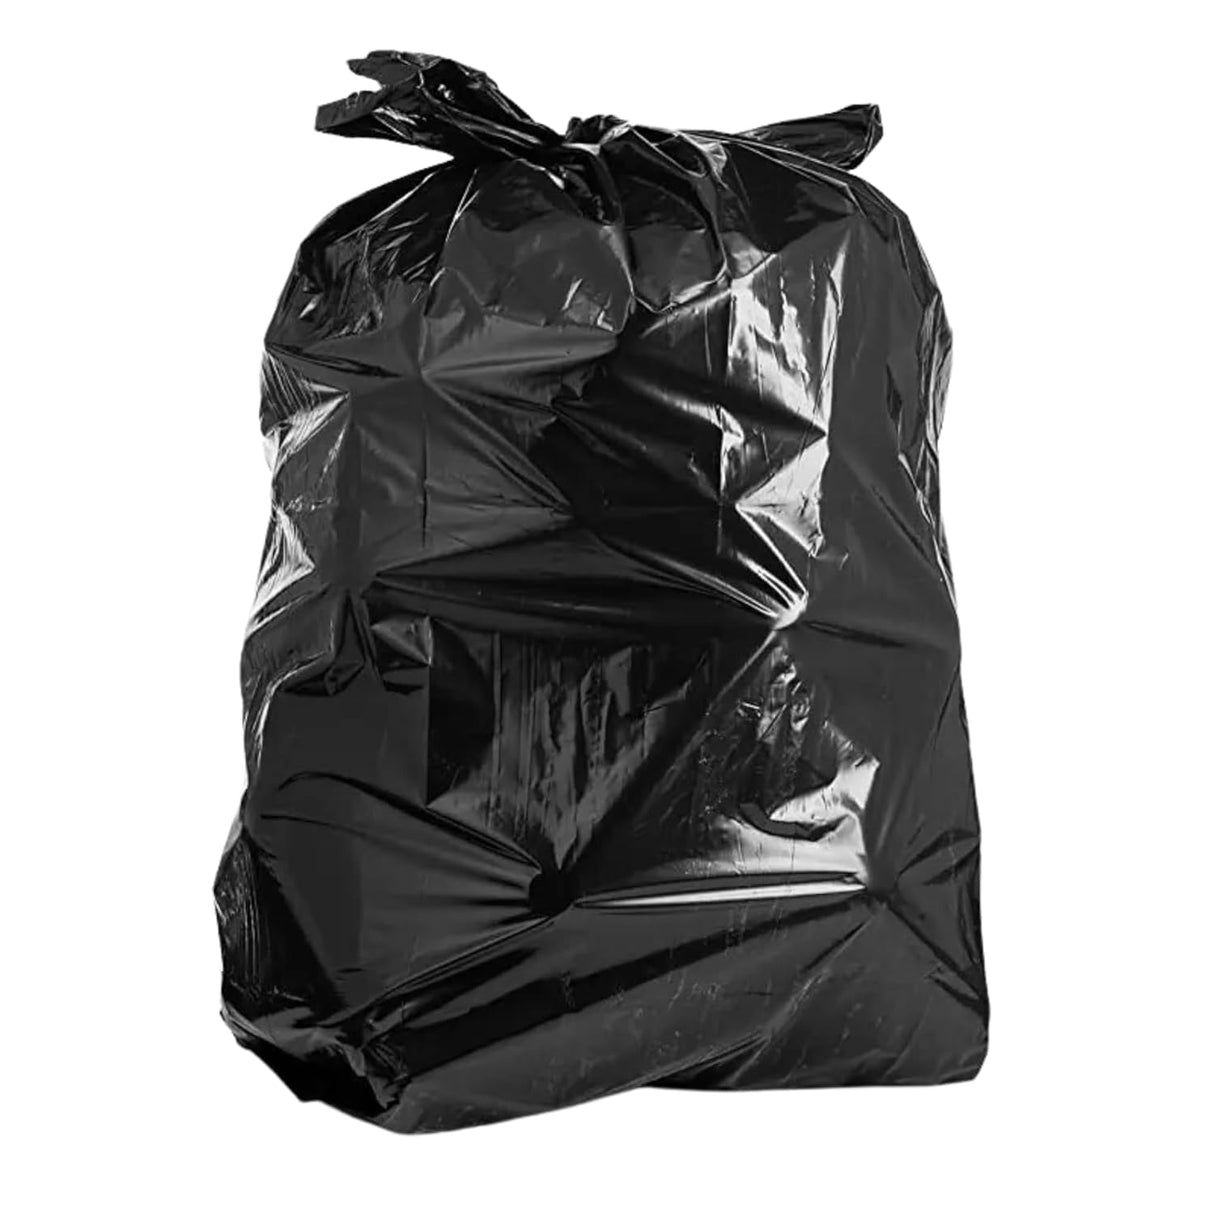 Singhal 120 Micron 18x22 Inch Garbage Bags Pack of 10 Medium Size | Plastic Dustbin Bags | Trash Bags For Kitchen, Office, Warehouse, Restaurant and 5 Star Hotel, Black Trash Bags